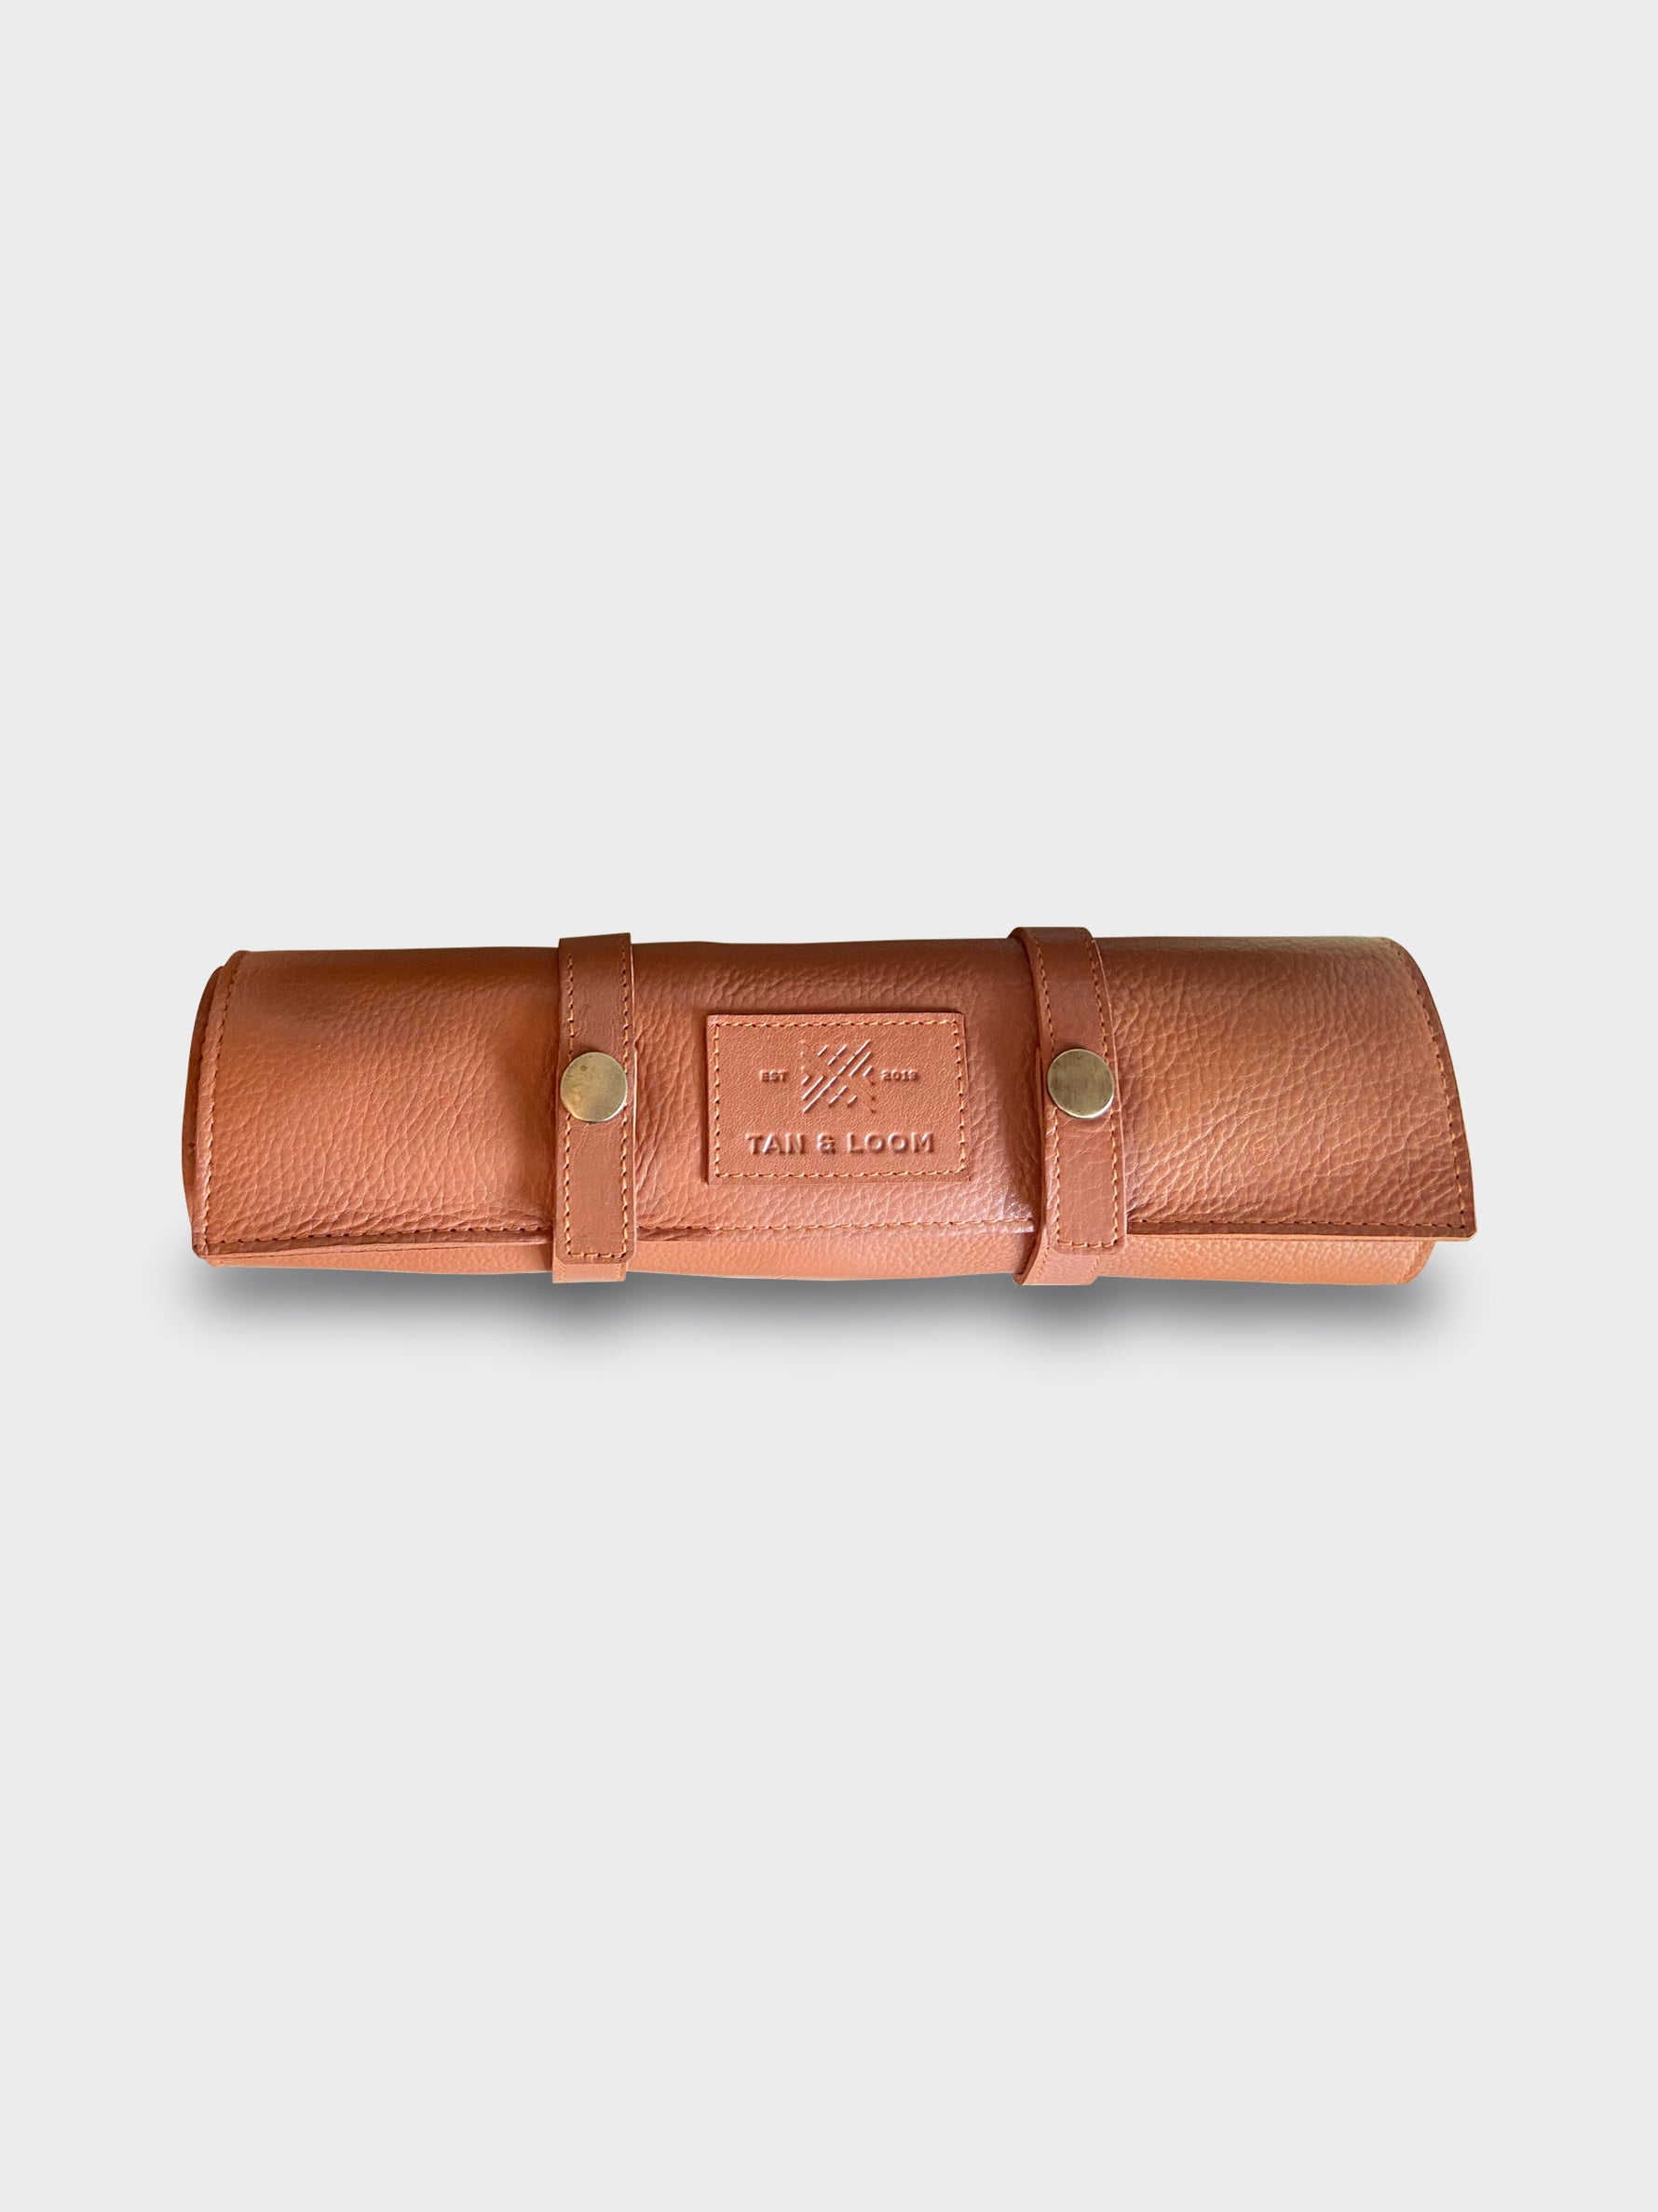 Handcrafted Genuine Vegetable Tanned Leather Artist's Roll Dusty Peach for Men & Women Tan & Loom